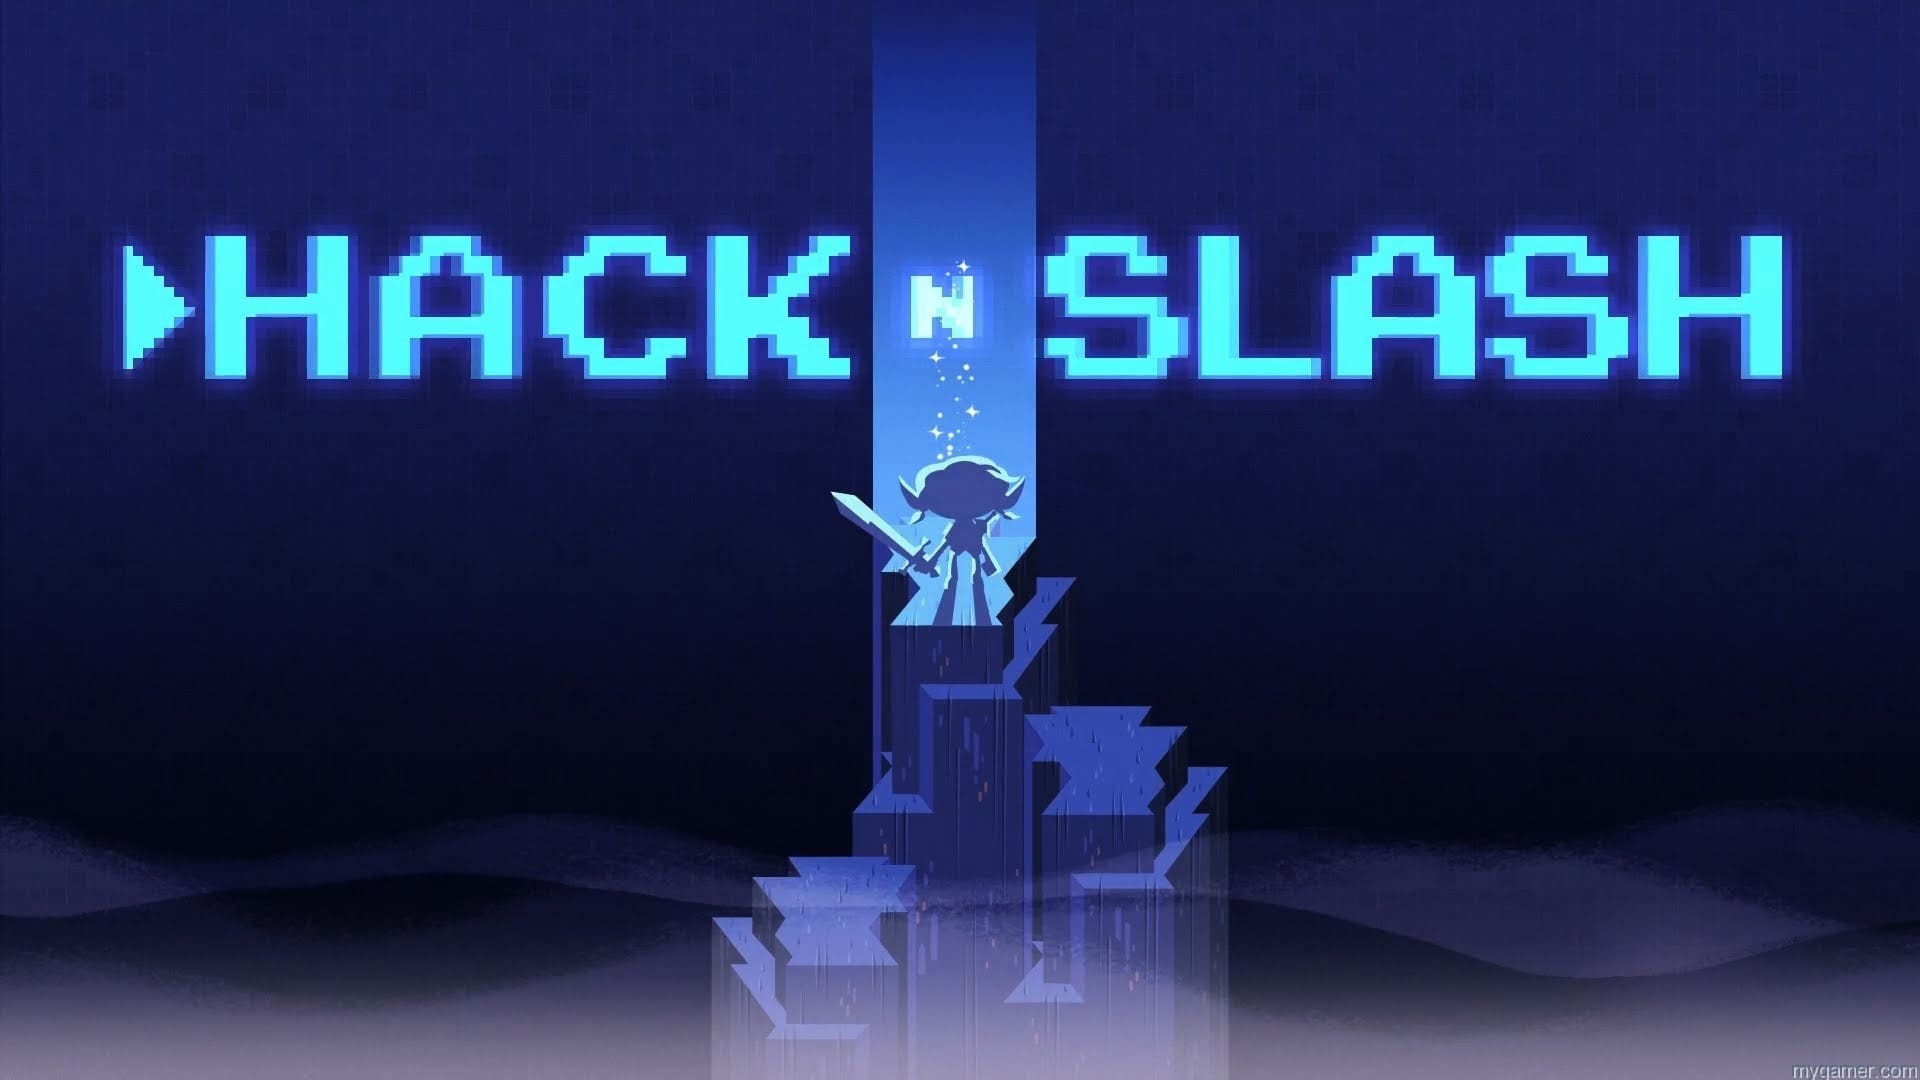 Hack 'n' Slash PC Review - Video Game Reviews, Previews and News - myGamer1920 x 1080